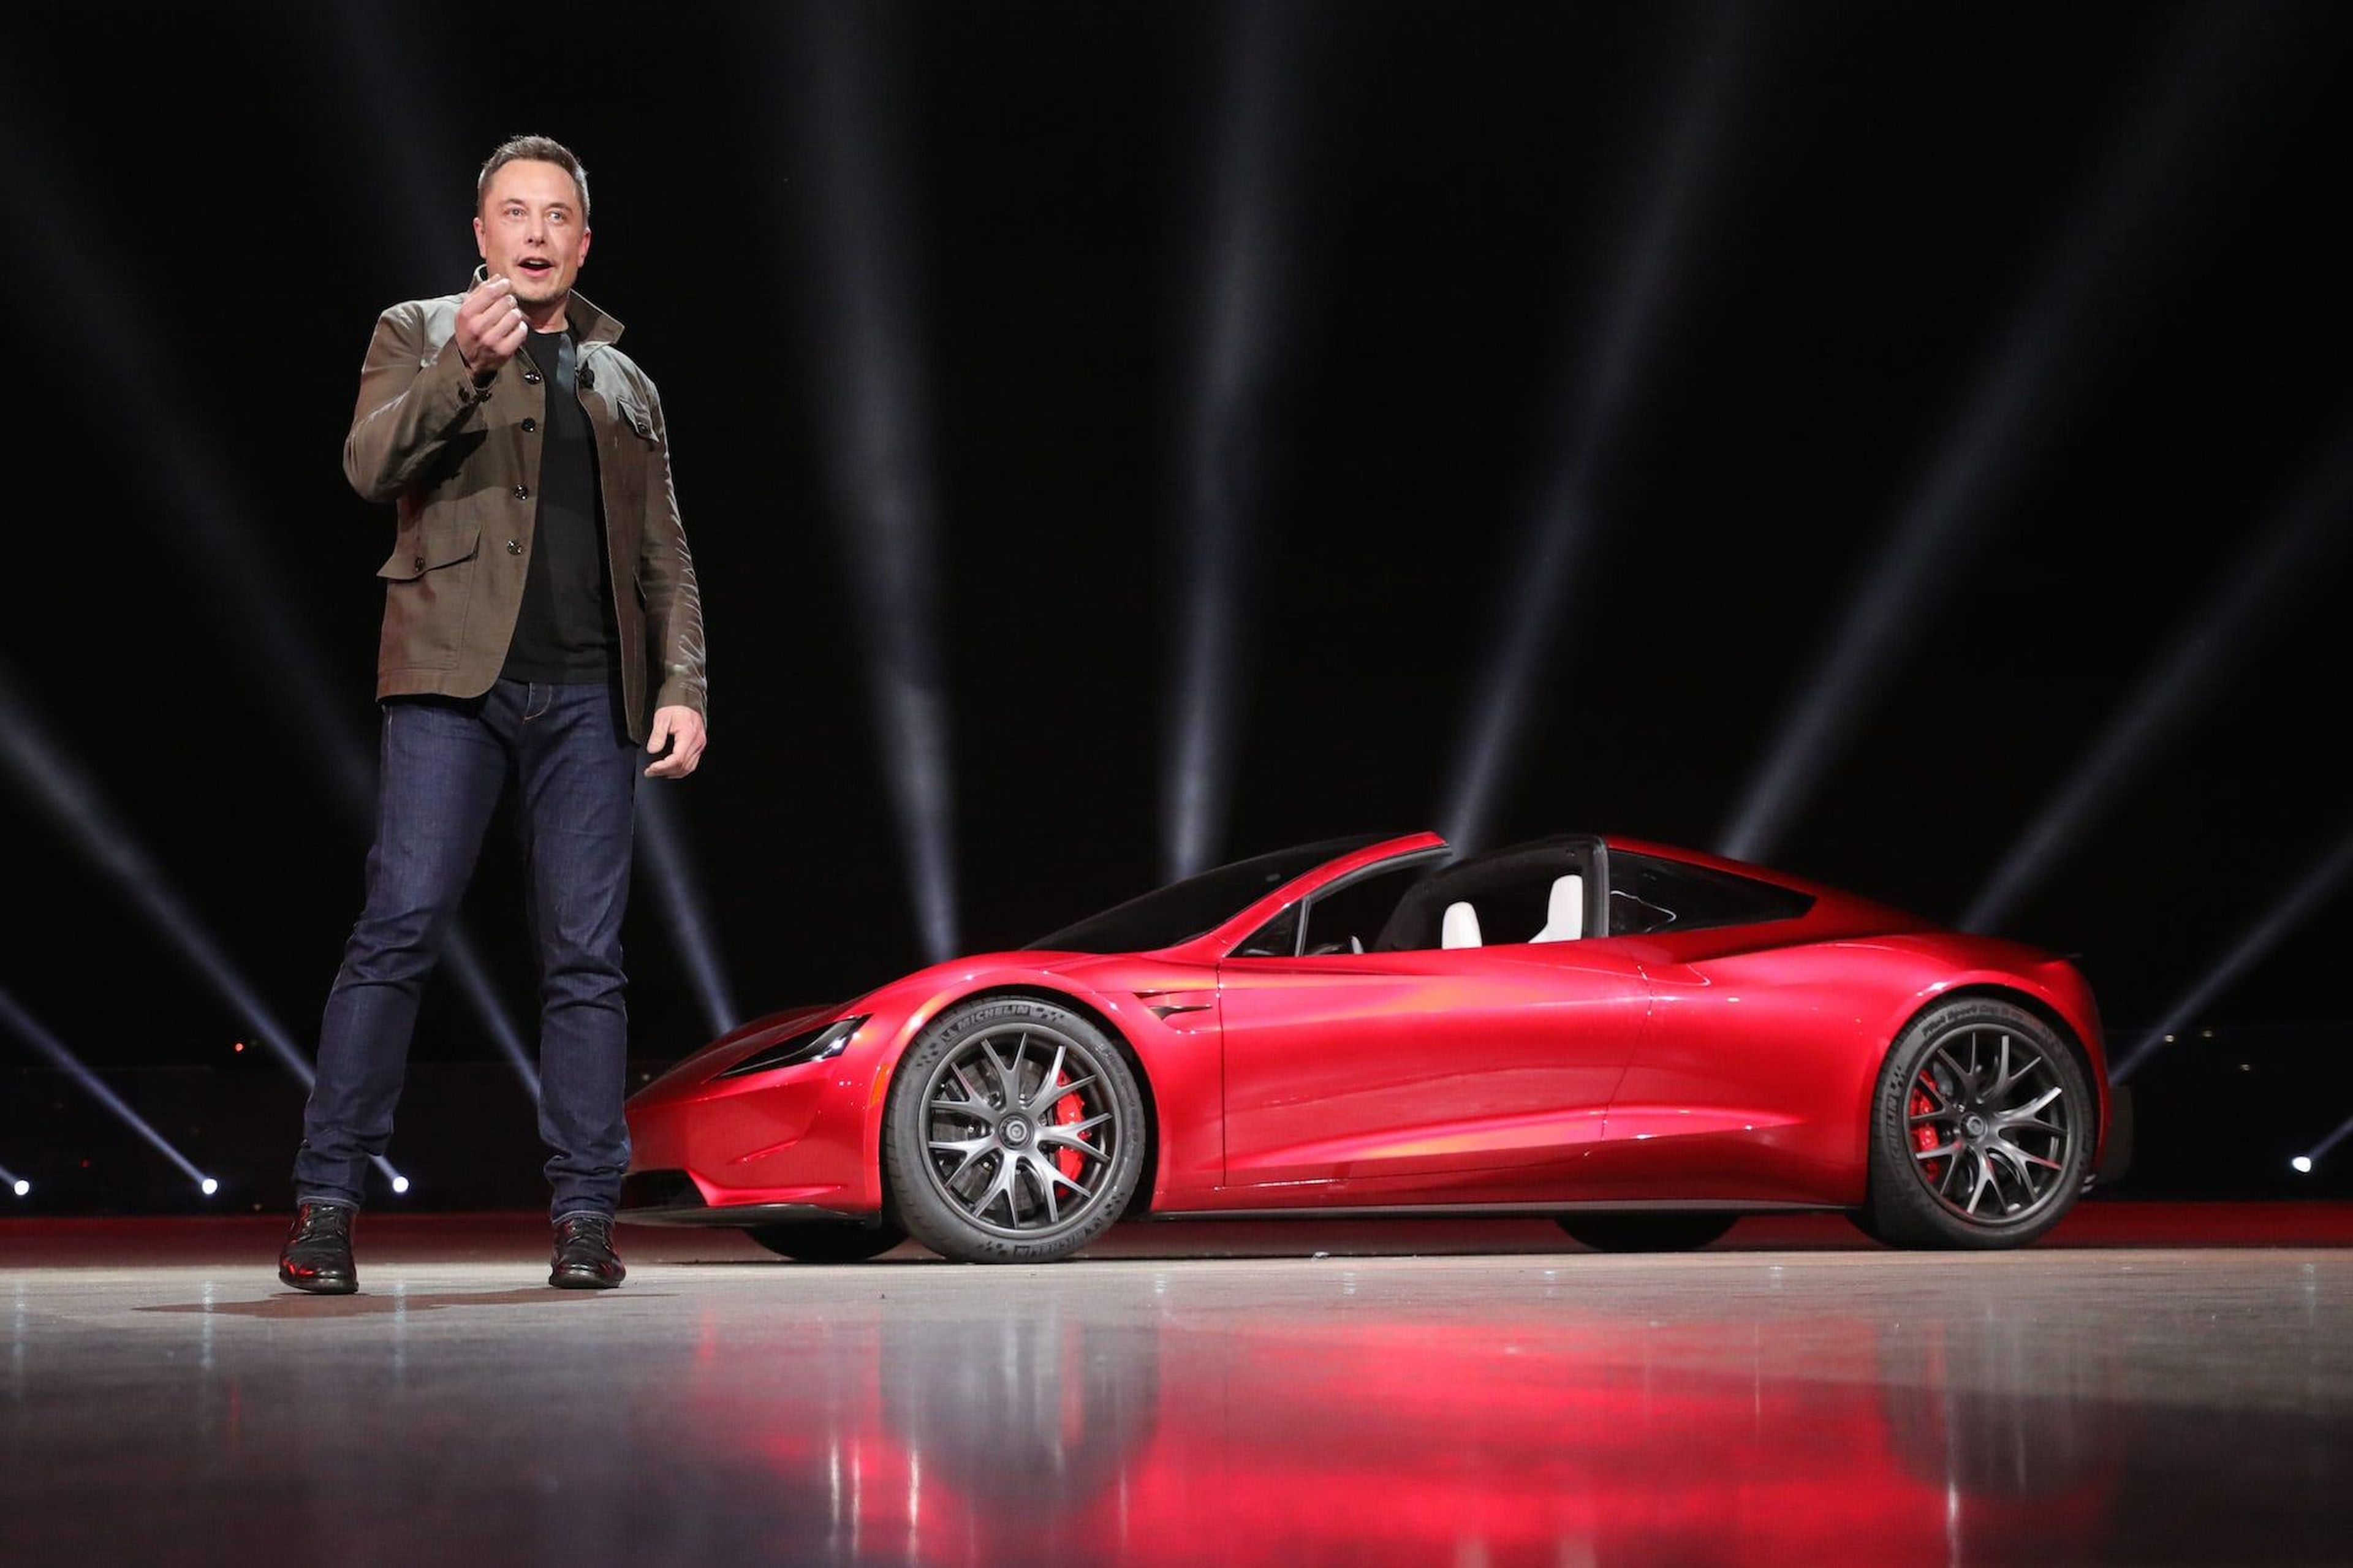 ... 20. The New Roadster! Tesla went back to its roots, but this time the Roadster would be a clean-sheet design and with an estimated 0-60 mph of 1.9 seconds, the fastest production car in the world.